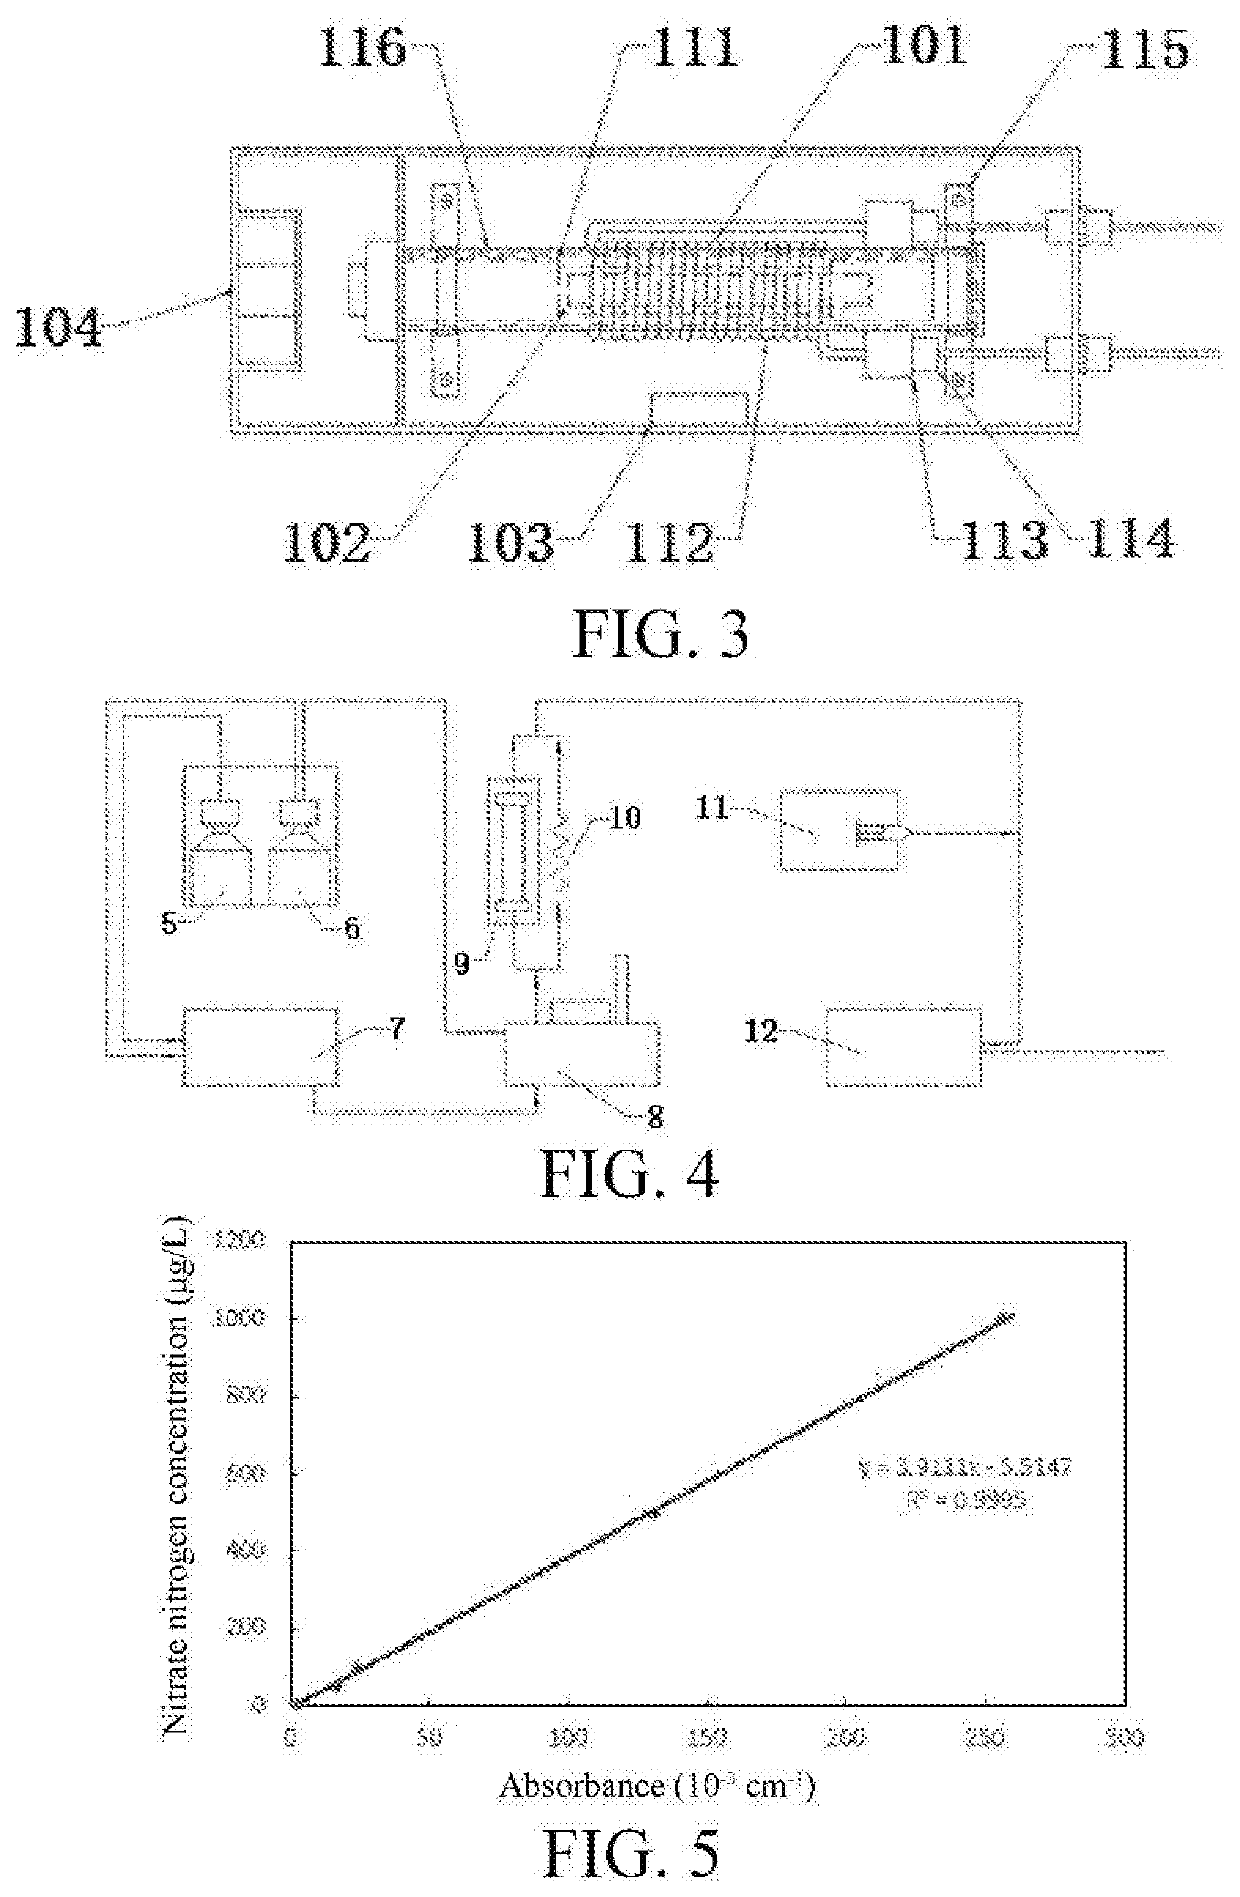 Size exclusion chromatography-combined nitrogen detector and application method